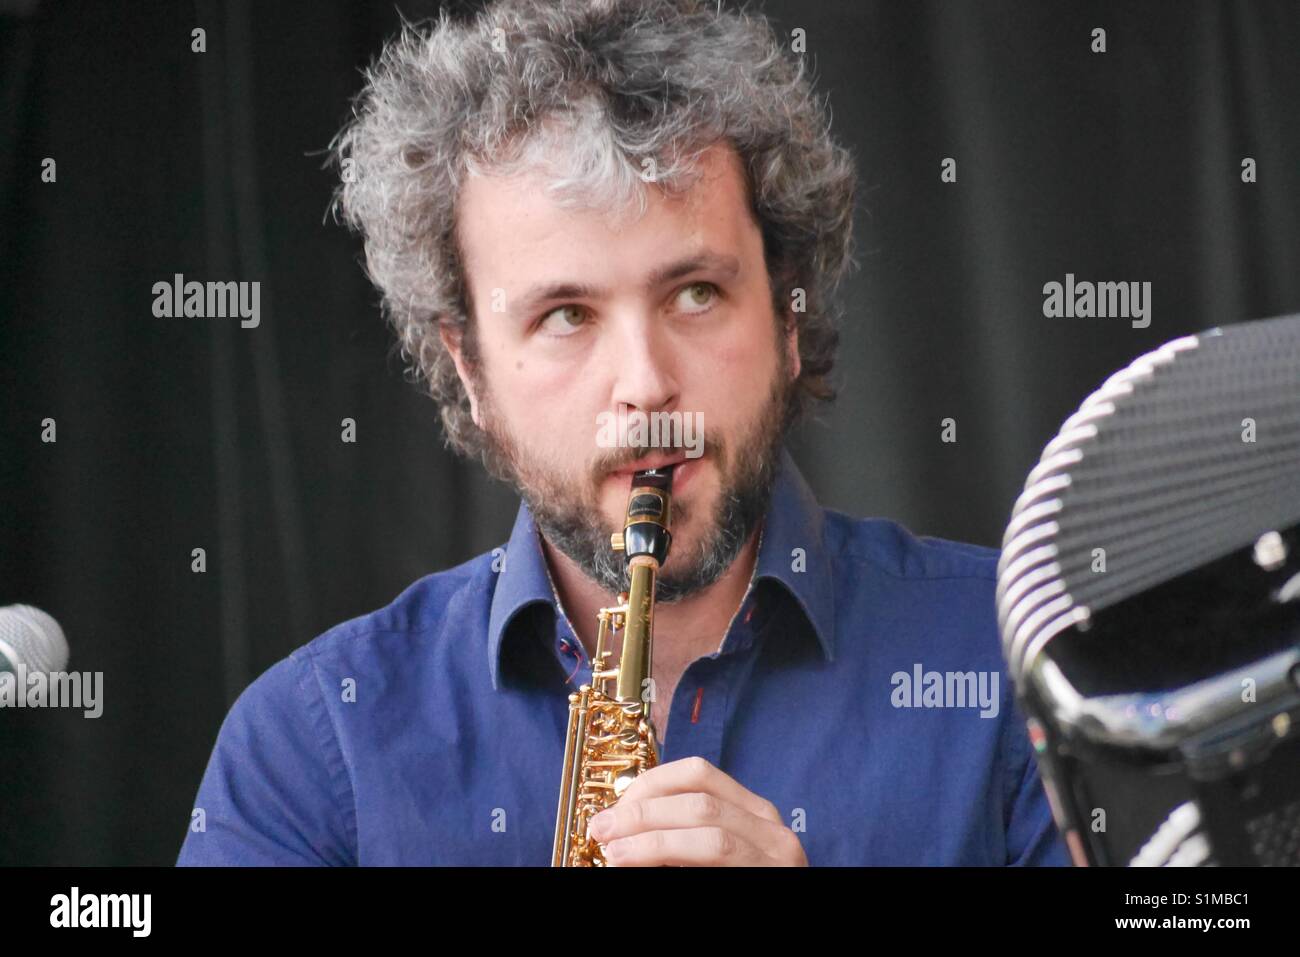 Male musician with salt and pepper hair playing clarinet Stock Photo